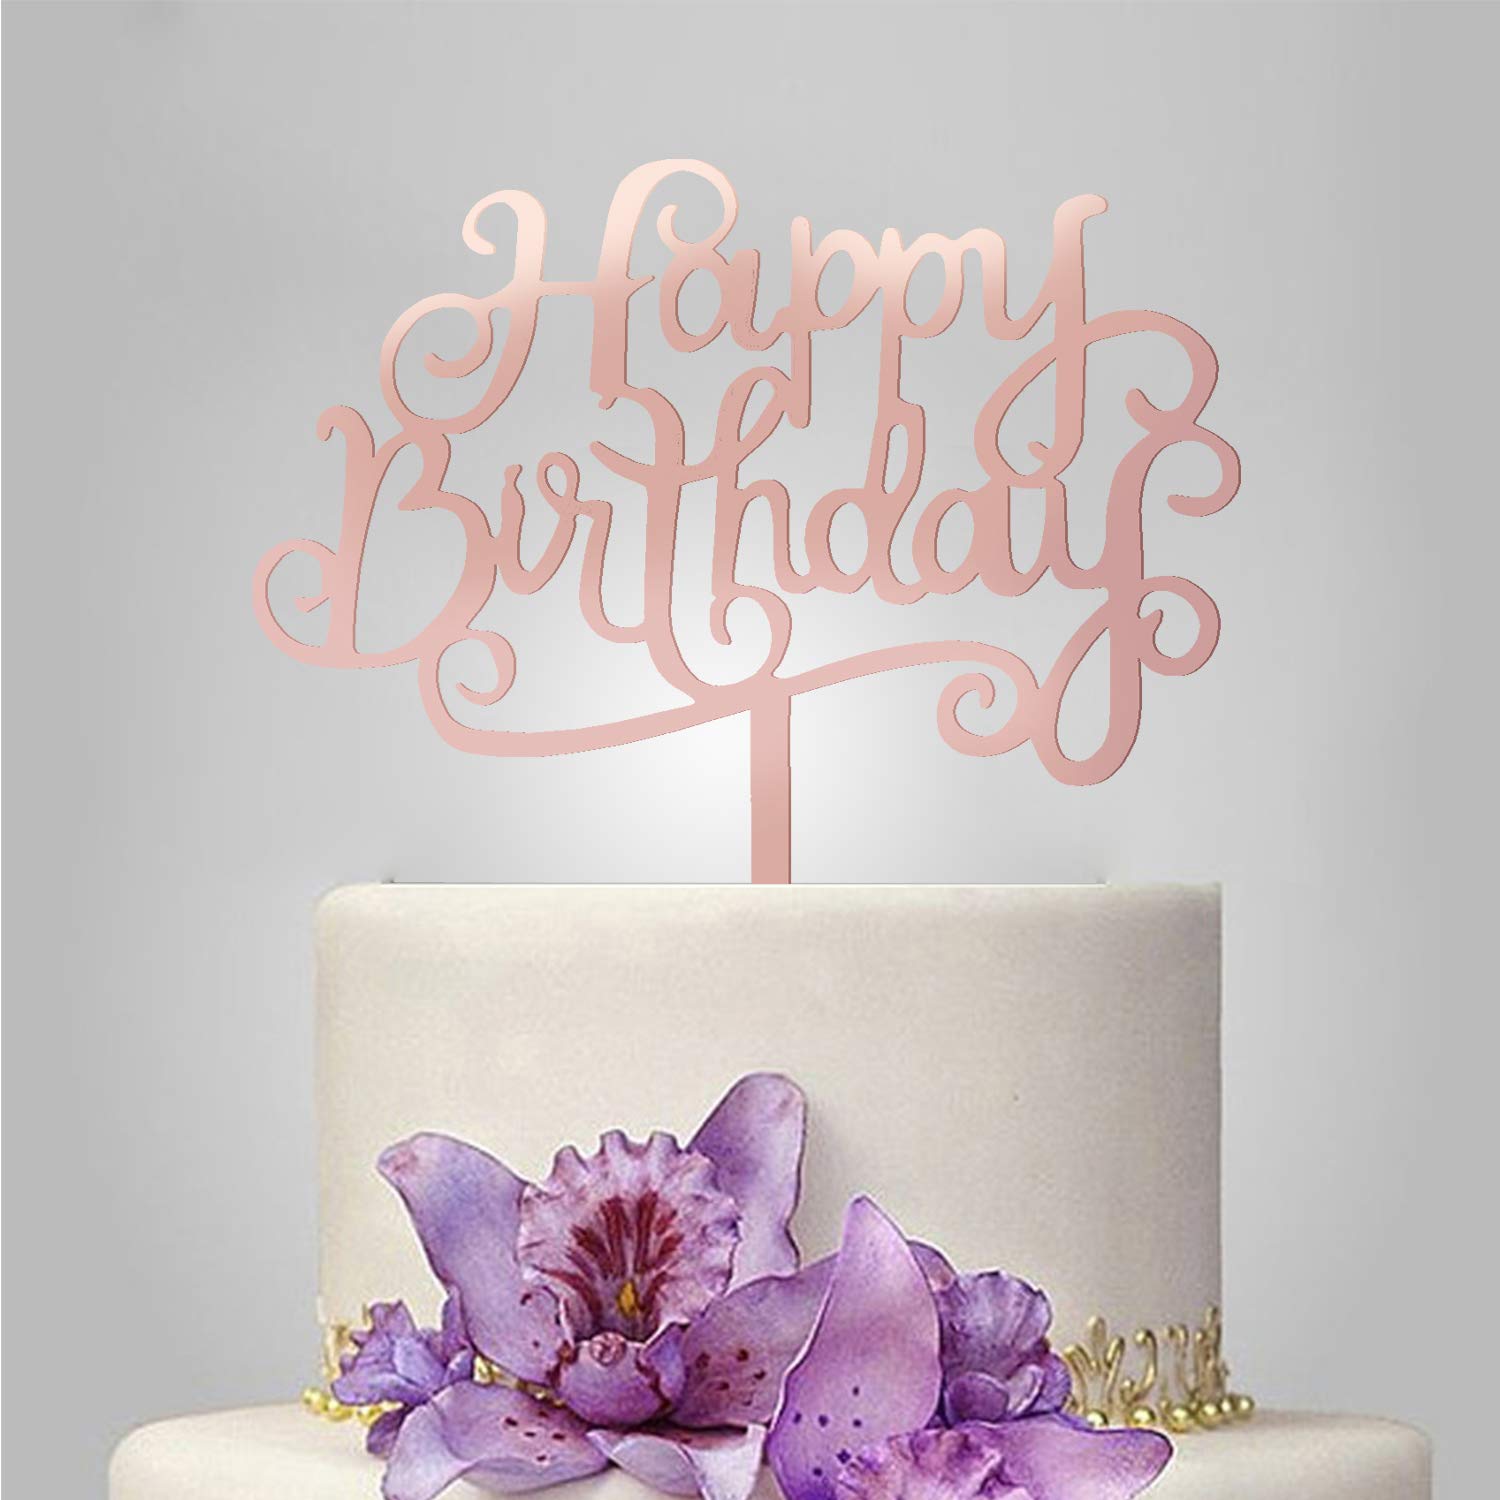 Gold Plated Cake Topper - HAPPY BIRTHDAY | Bake Group